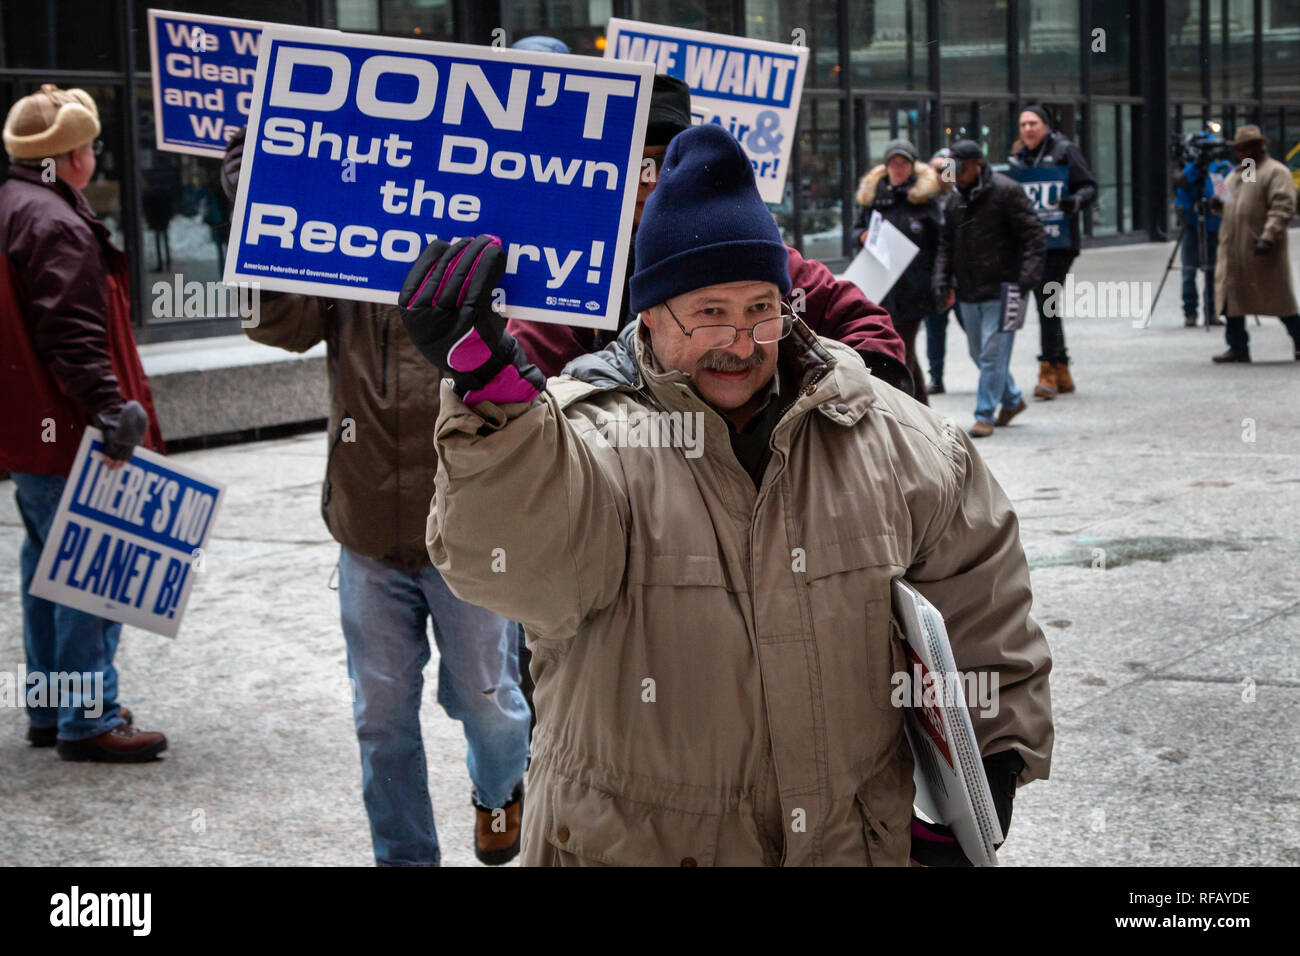 Chicago, Illinois, USA. 24th January, 2019. For the third time in just over two weeks furloughed government workers gathered at noon under the Calder Flamingo in Chicago' s frigid Federal Plaza and demanded that congress and President Trump put an end to the government shut down. While a light snow began to fall, and after listening to speeches of support from union leaders representing the AFGE, the NTEU and other concerned organizations, the effected workers marched around the plaza with their signs. Credit: Matthew Kaplan/Alamy Live News Stock Photo